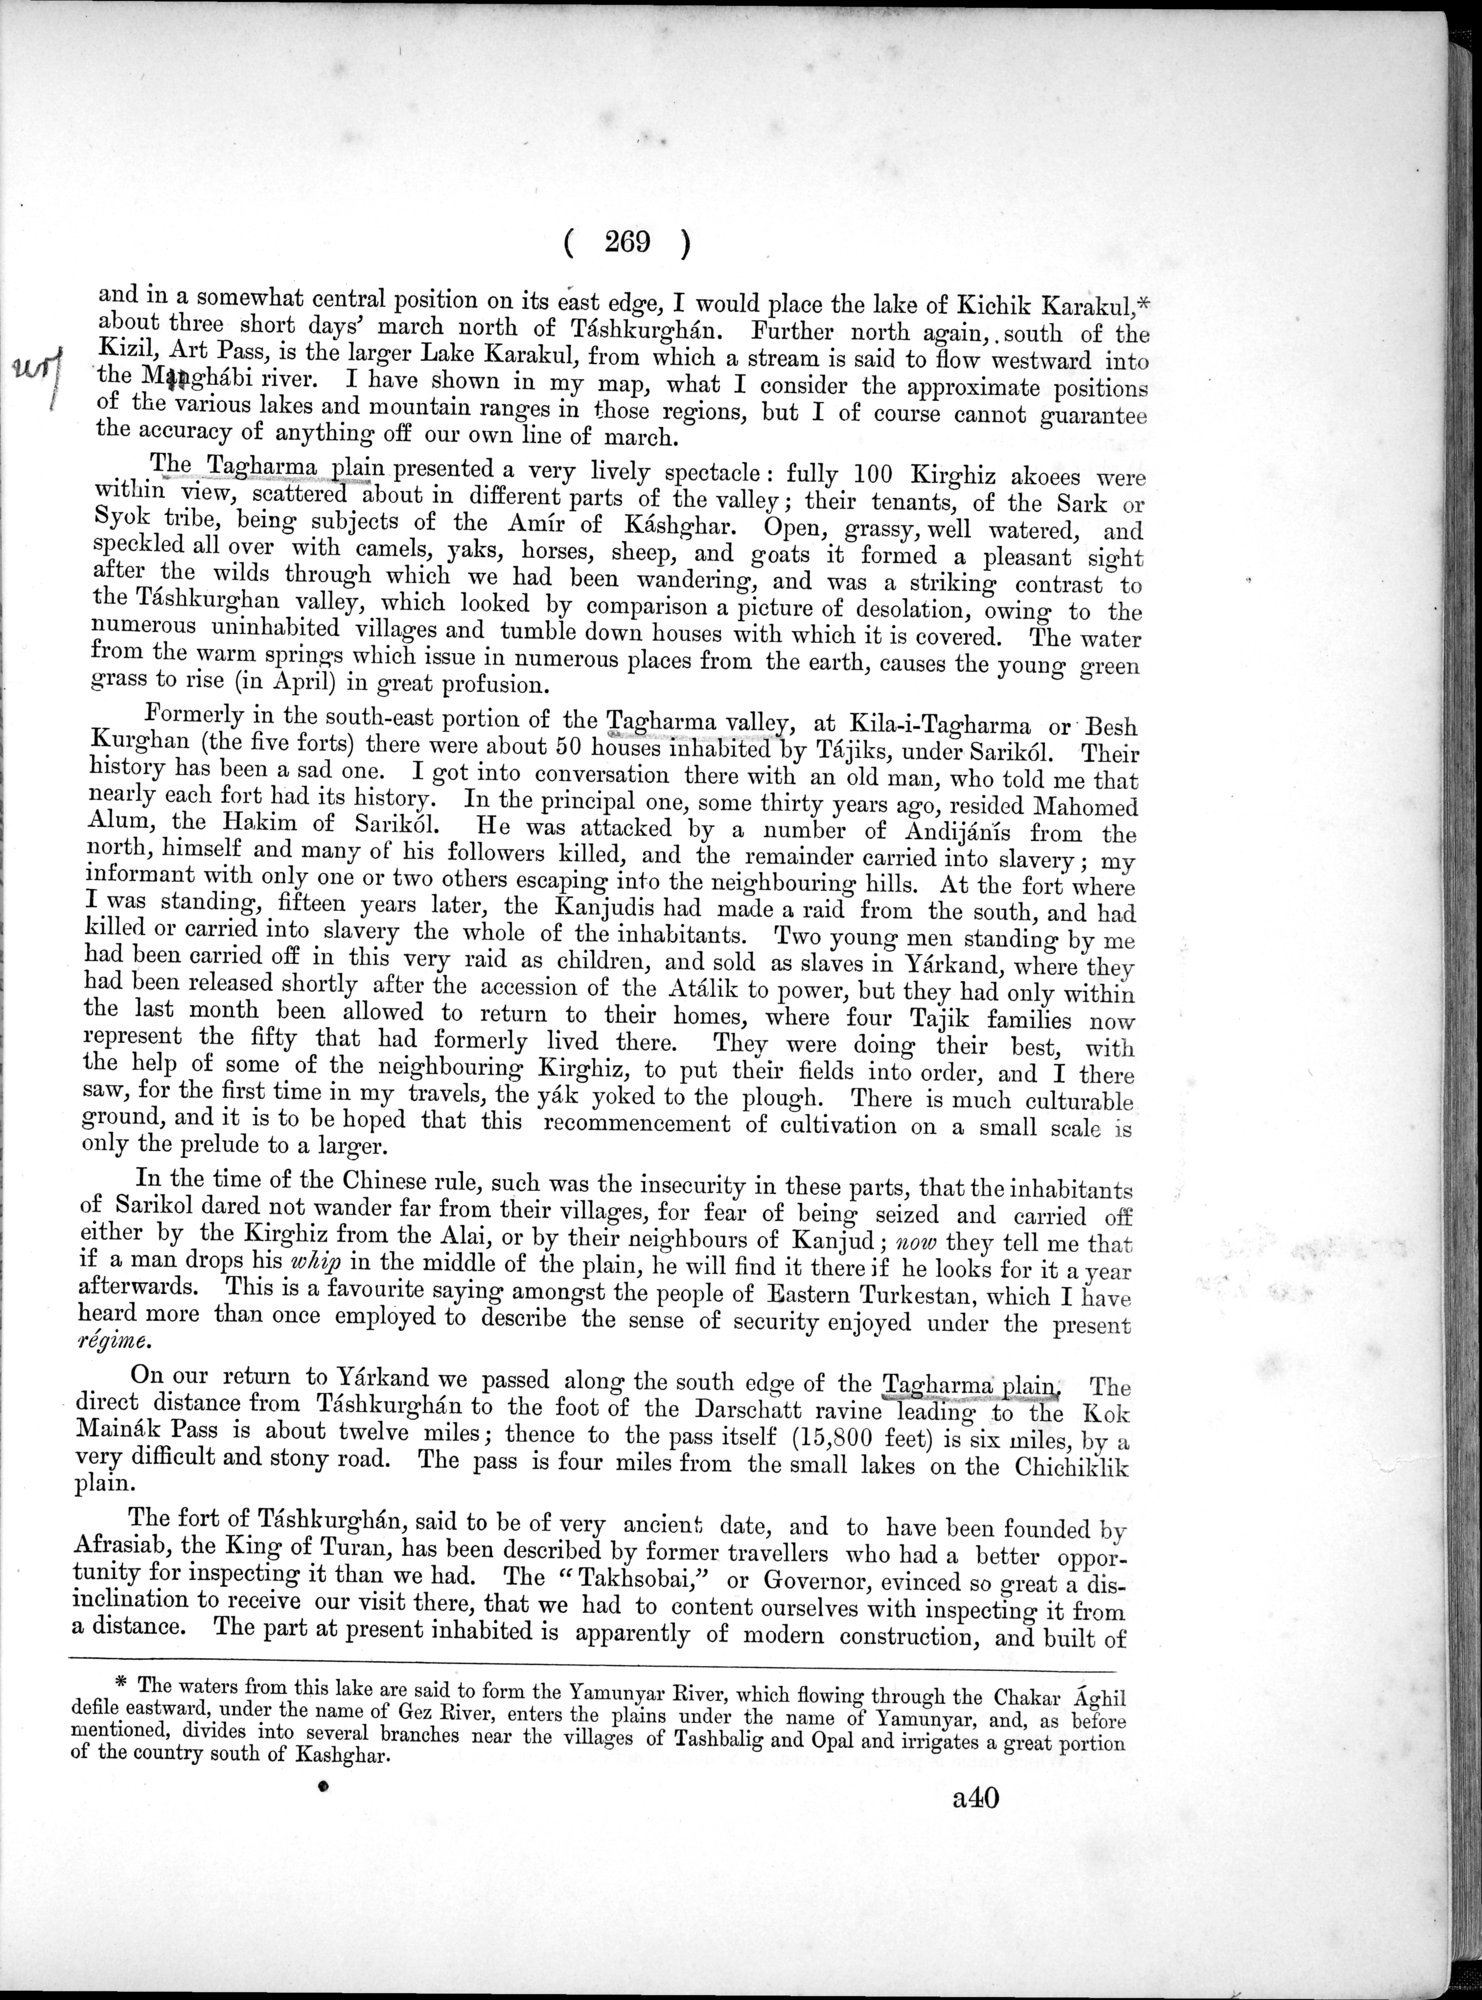 Report of a Mission to Yarkund in 1873 : vol.1 / Page 387 (Grayscale High Resolution Image)